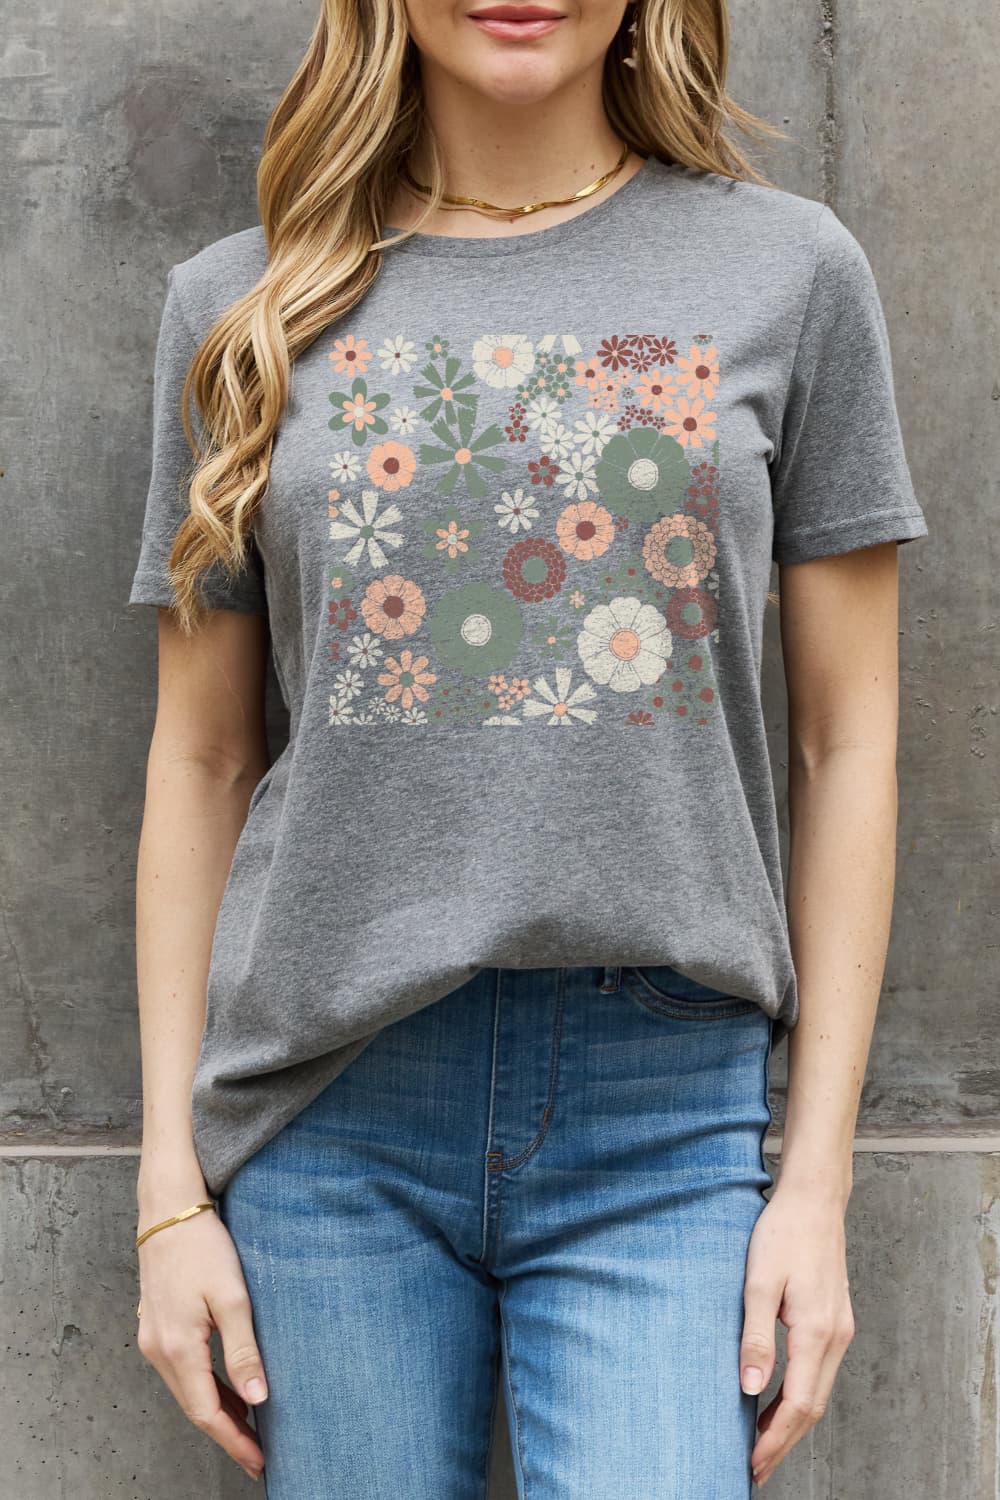 Slate Gray Simply Love Flower Graphic Cotton Tee Sentient Beauty Fashions Tops